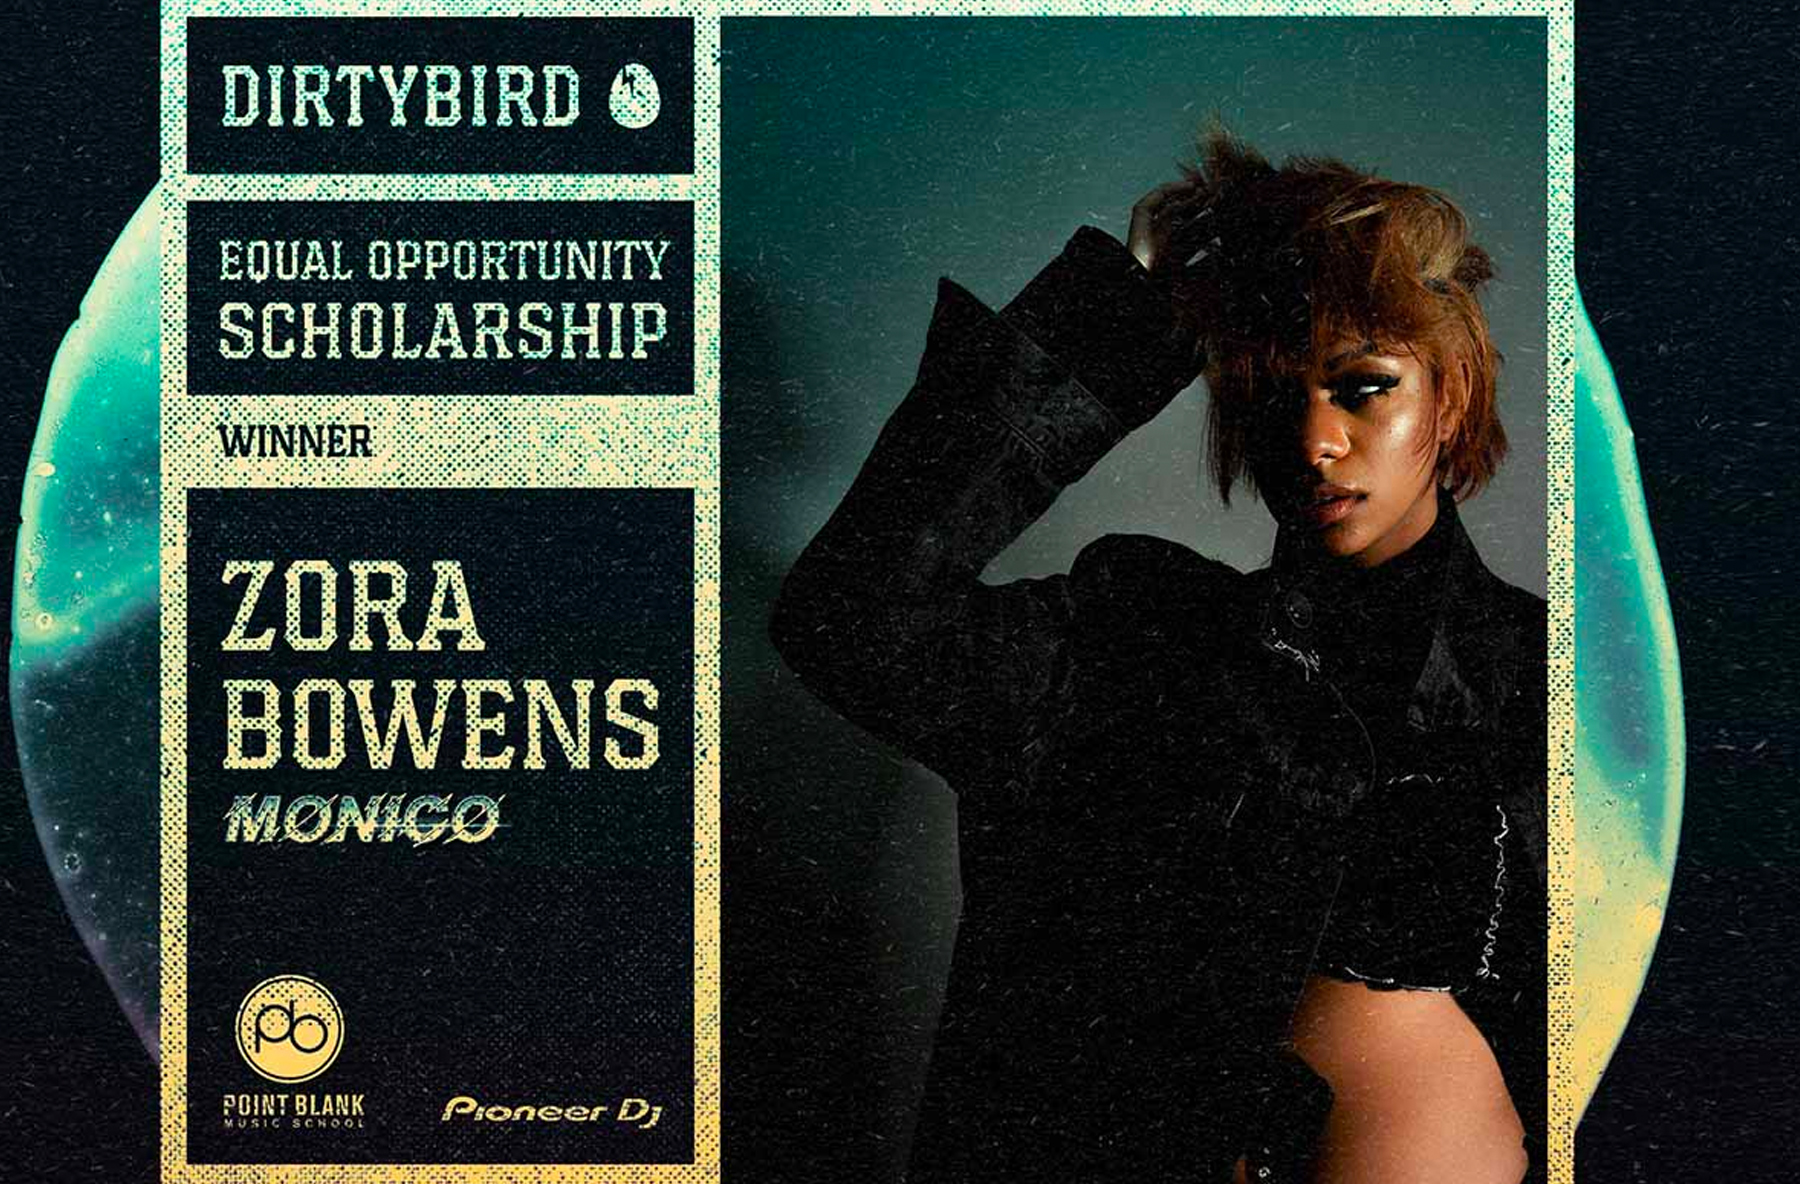 Meet Zora Bowens Our Point Blank X Dirtybird Records Equal Opportunity Scholarship Winner